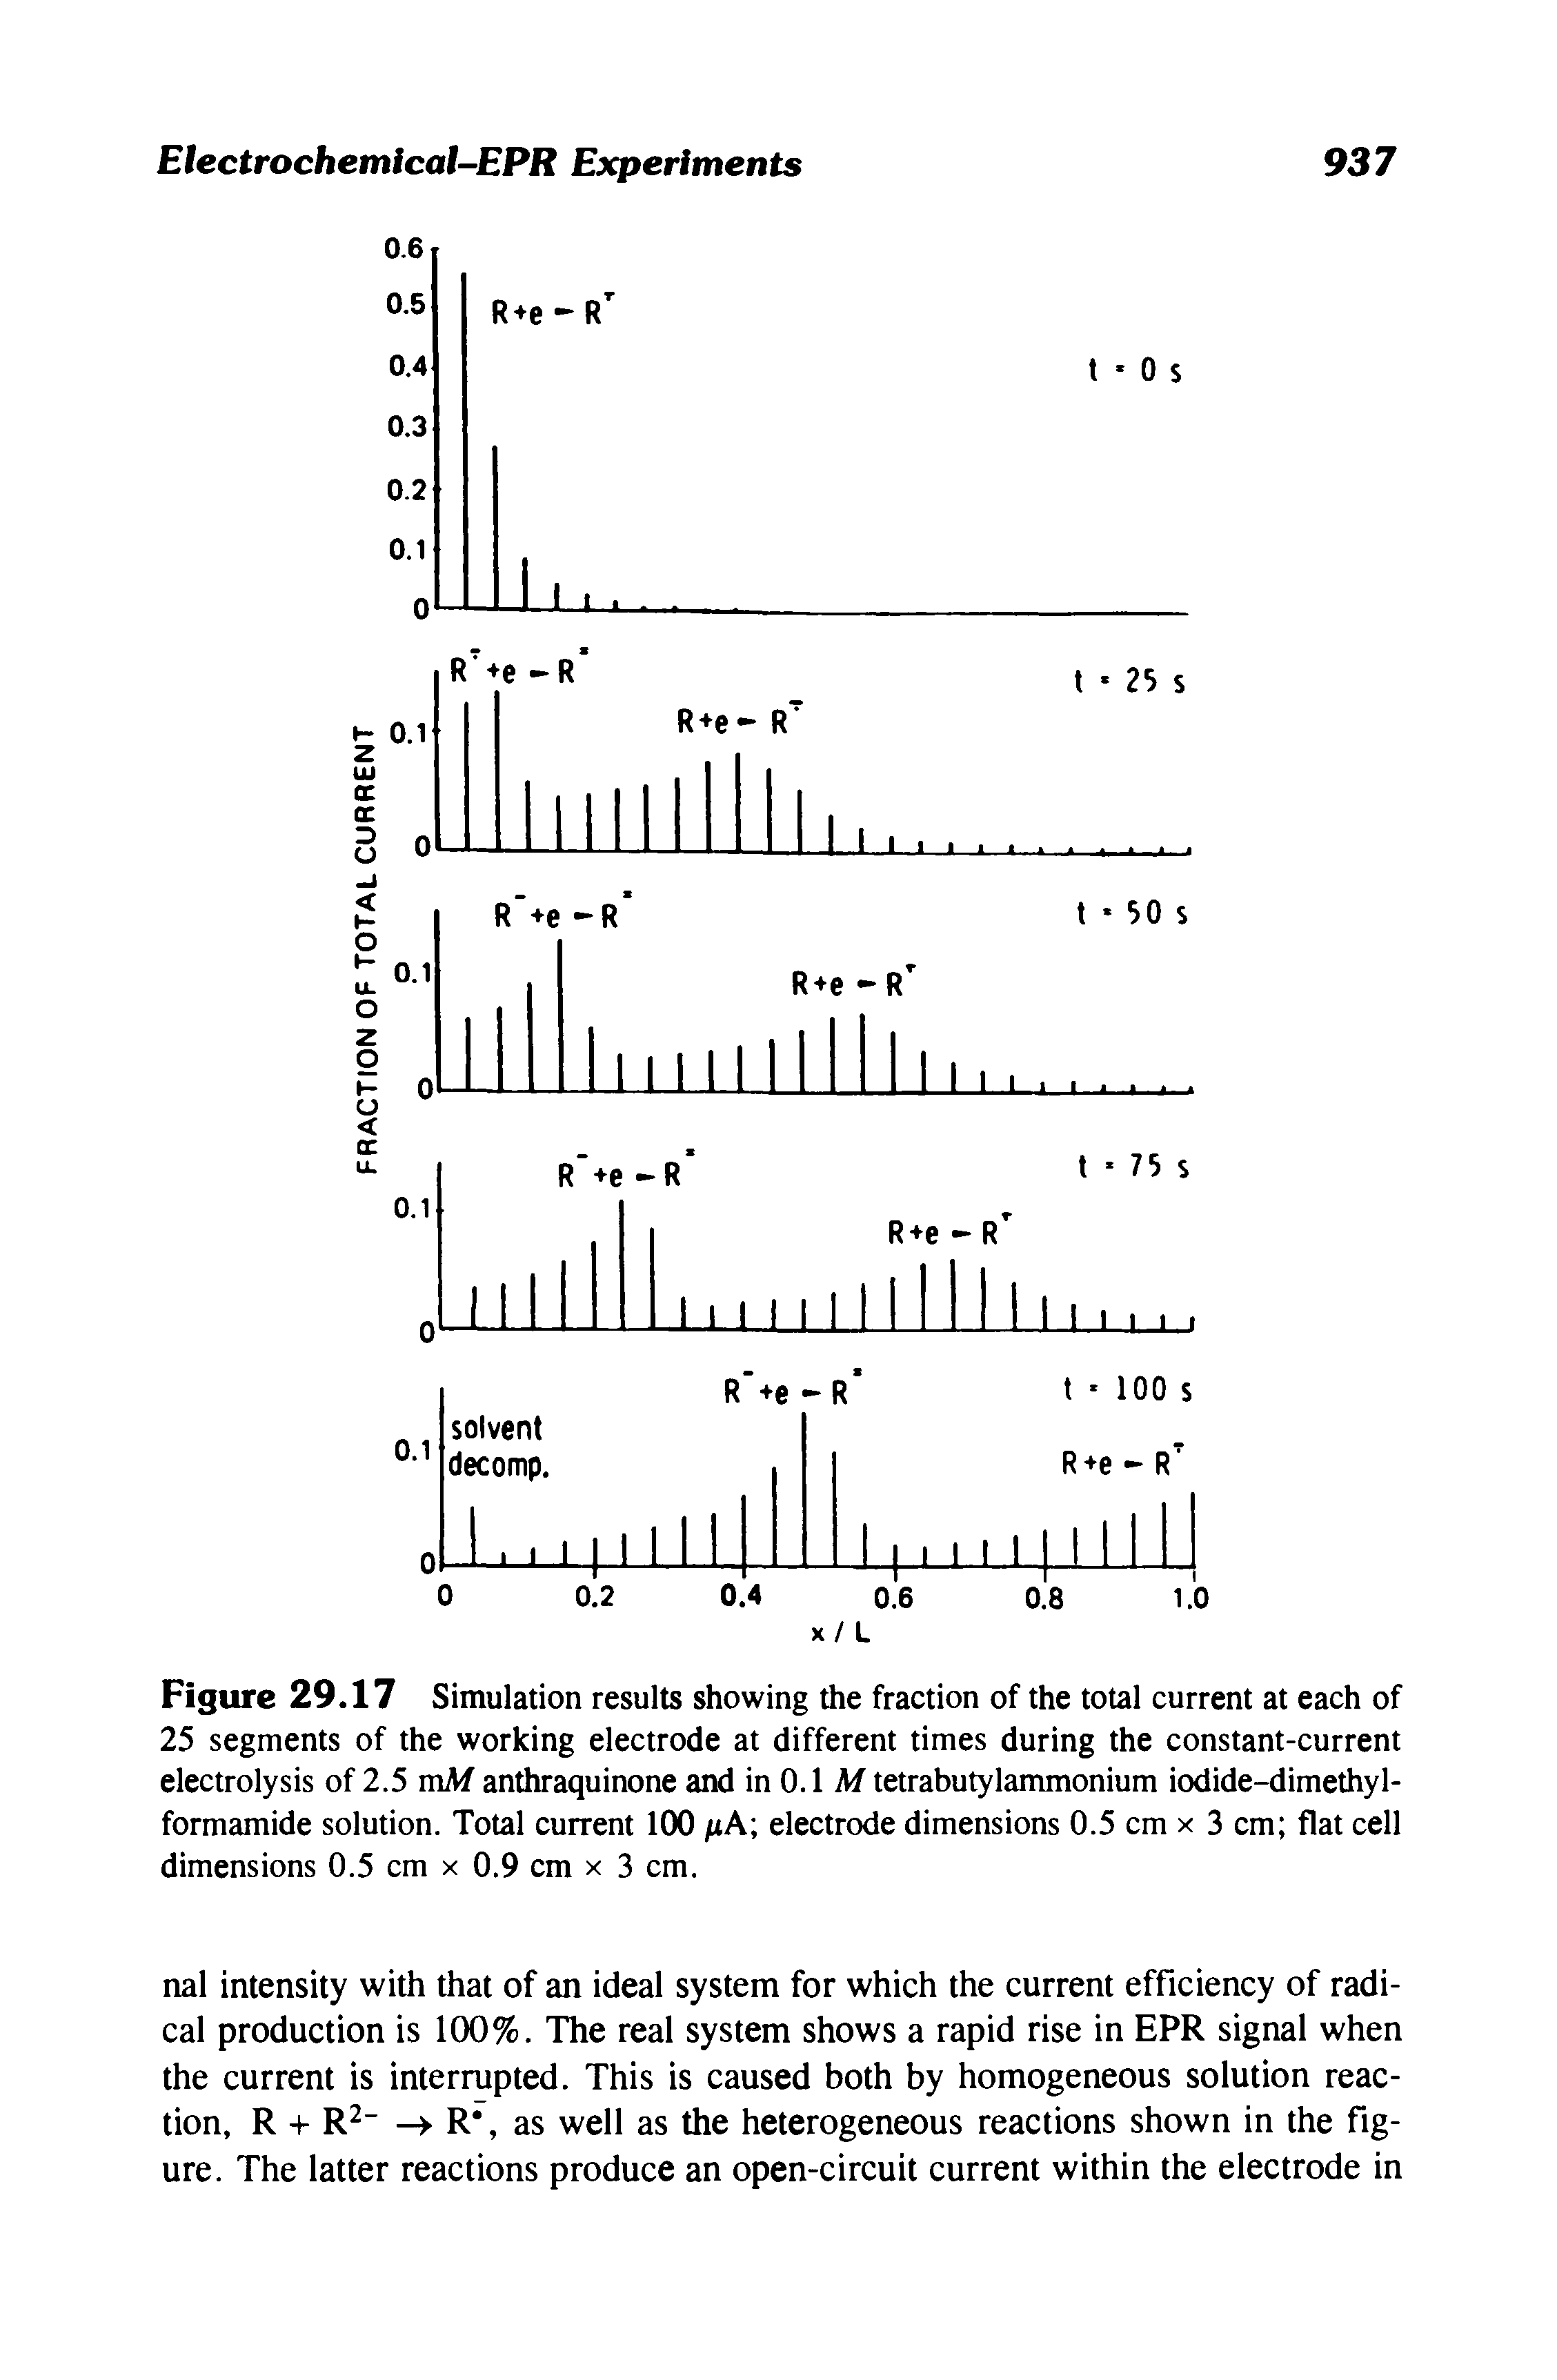 Figure 29.17 Simulation results showing the fraction of the total current at each of 25 segments of the working electrode at different times during the constant-current electrolysis of 2.5 mAf anthraquinone and in 0.1 M tetrabutylammonium iodide-dimethyl-formamide solution. Total current 100 / A electrode dimensions 0.5 cm x 3 cm flat cell dimensions 0.5 cm x 0.9 cm x 3 cm.